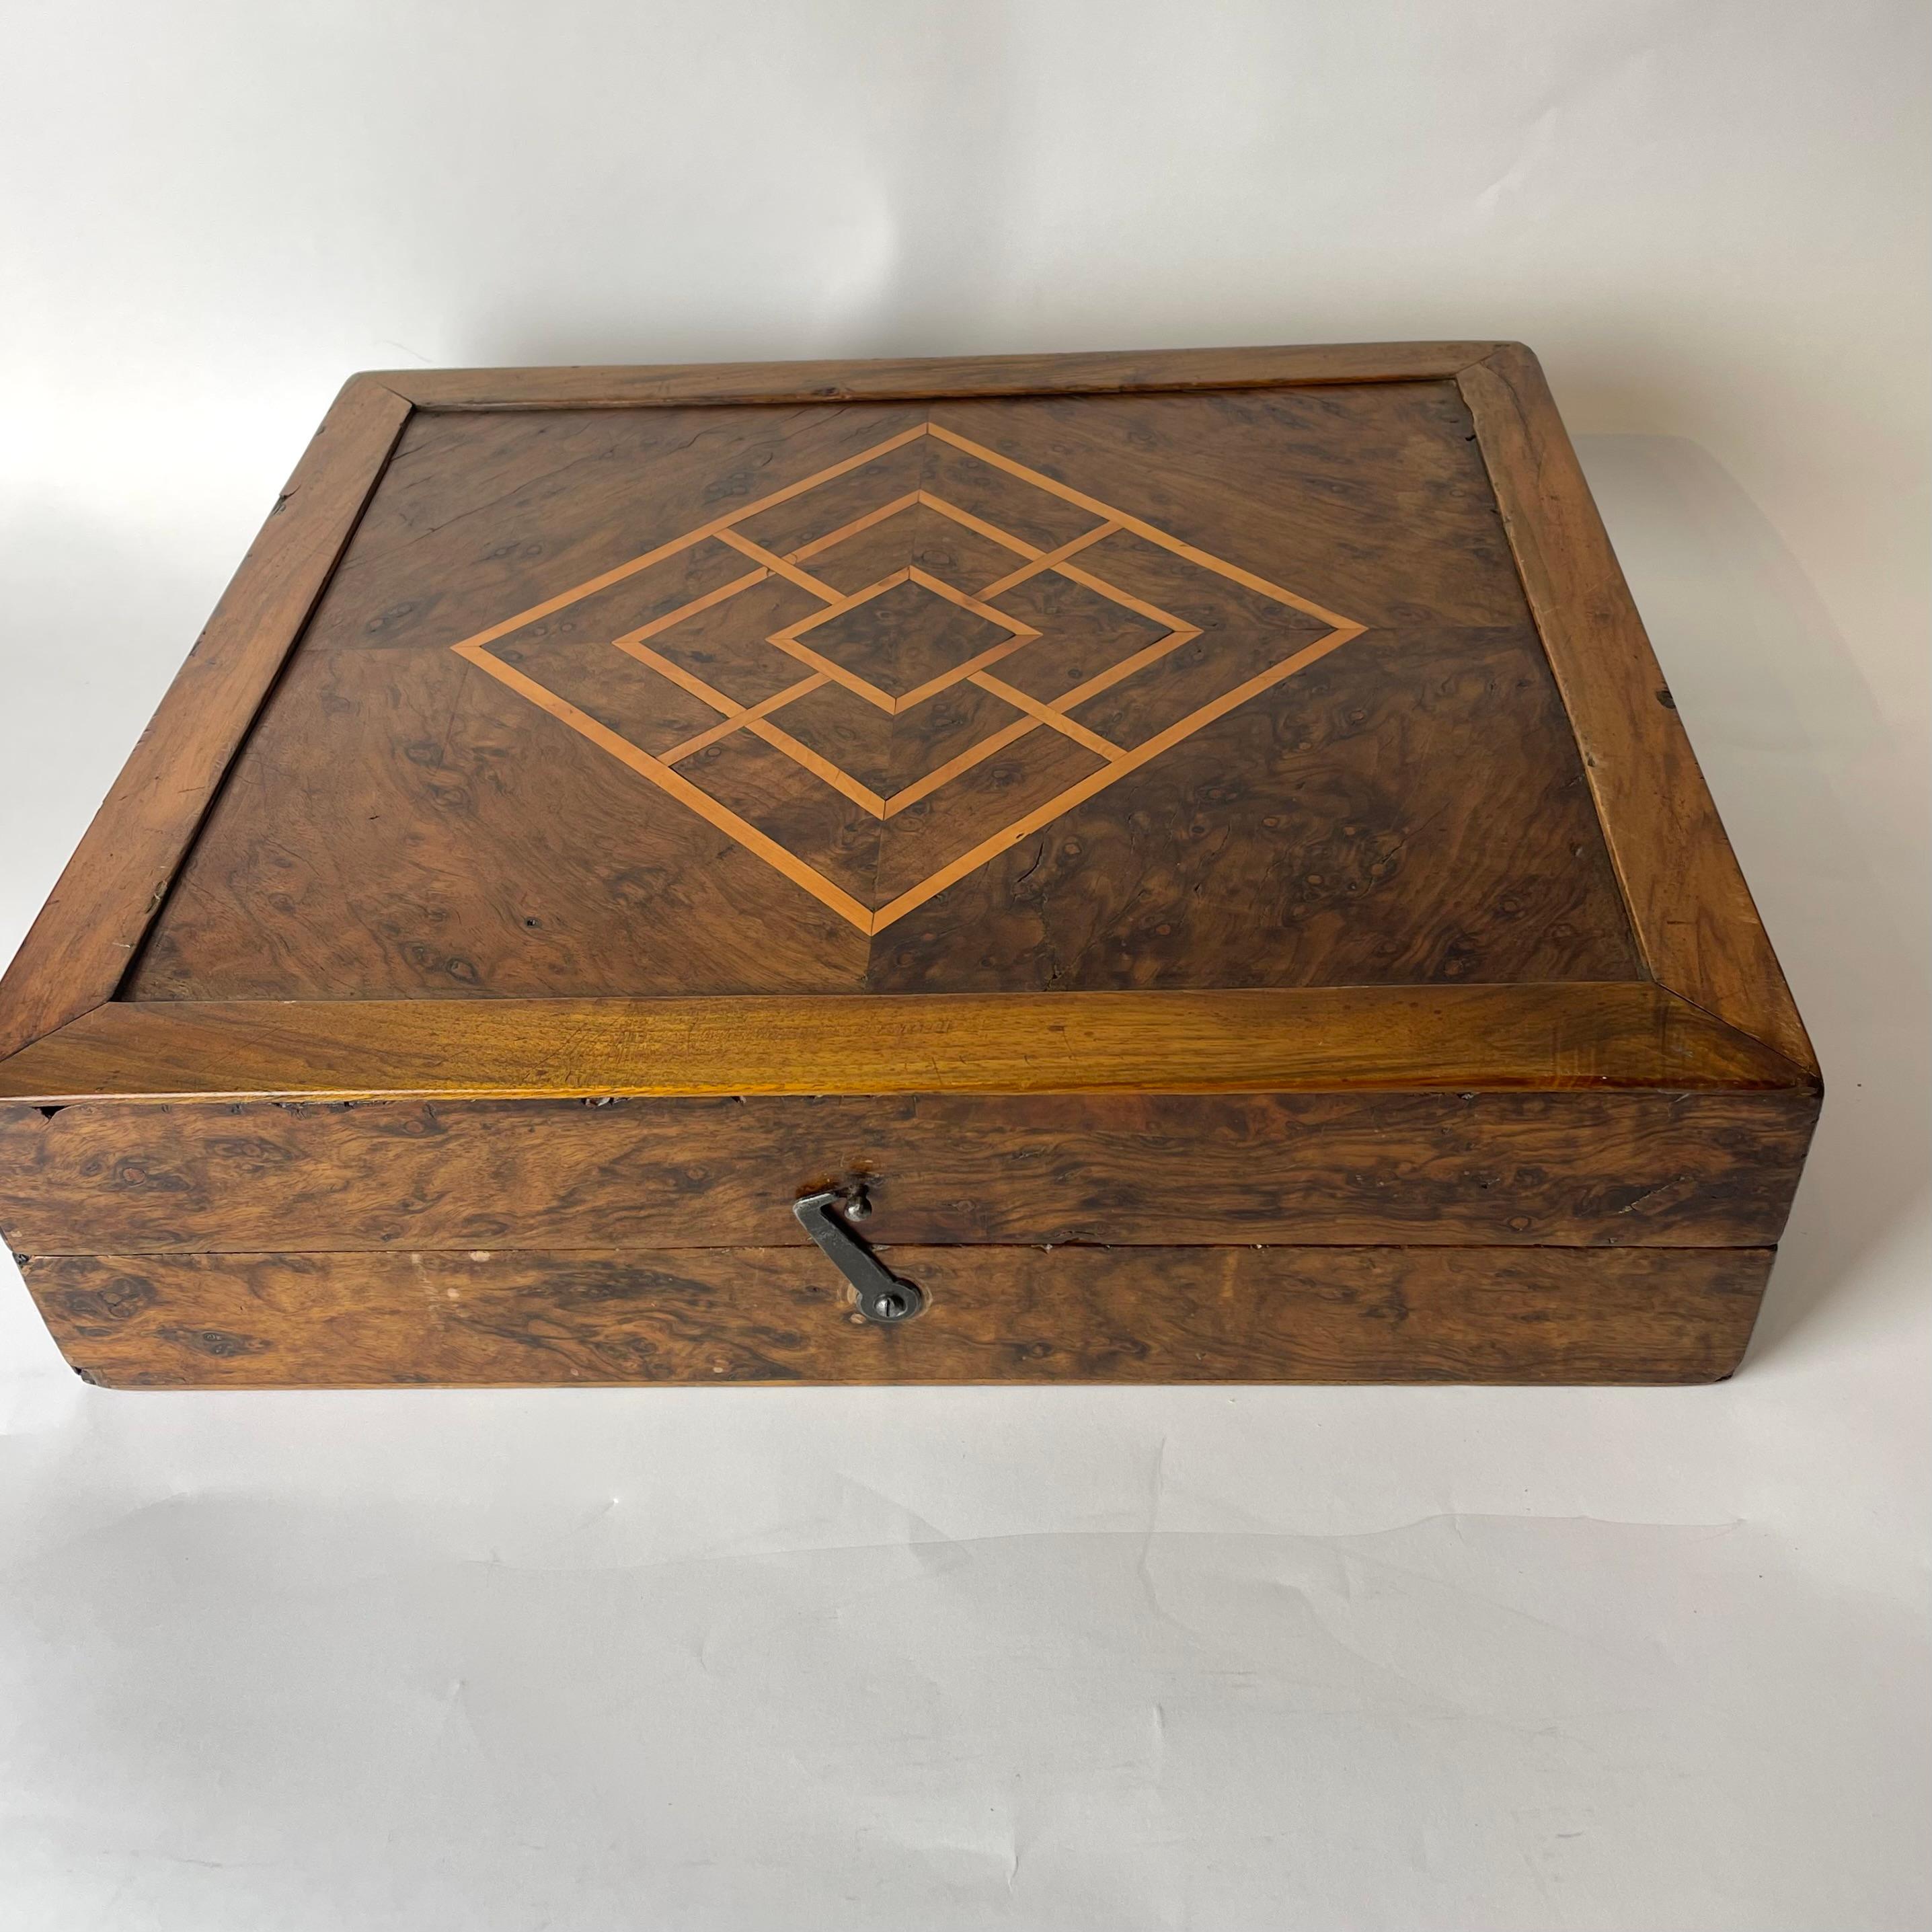 Birch Late Baroque Games Box Chess Backgammon Decorated with Rich Wooden Interior.   For Sale